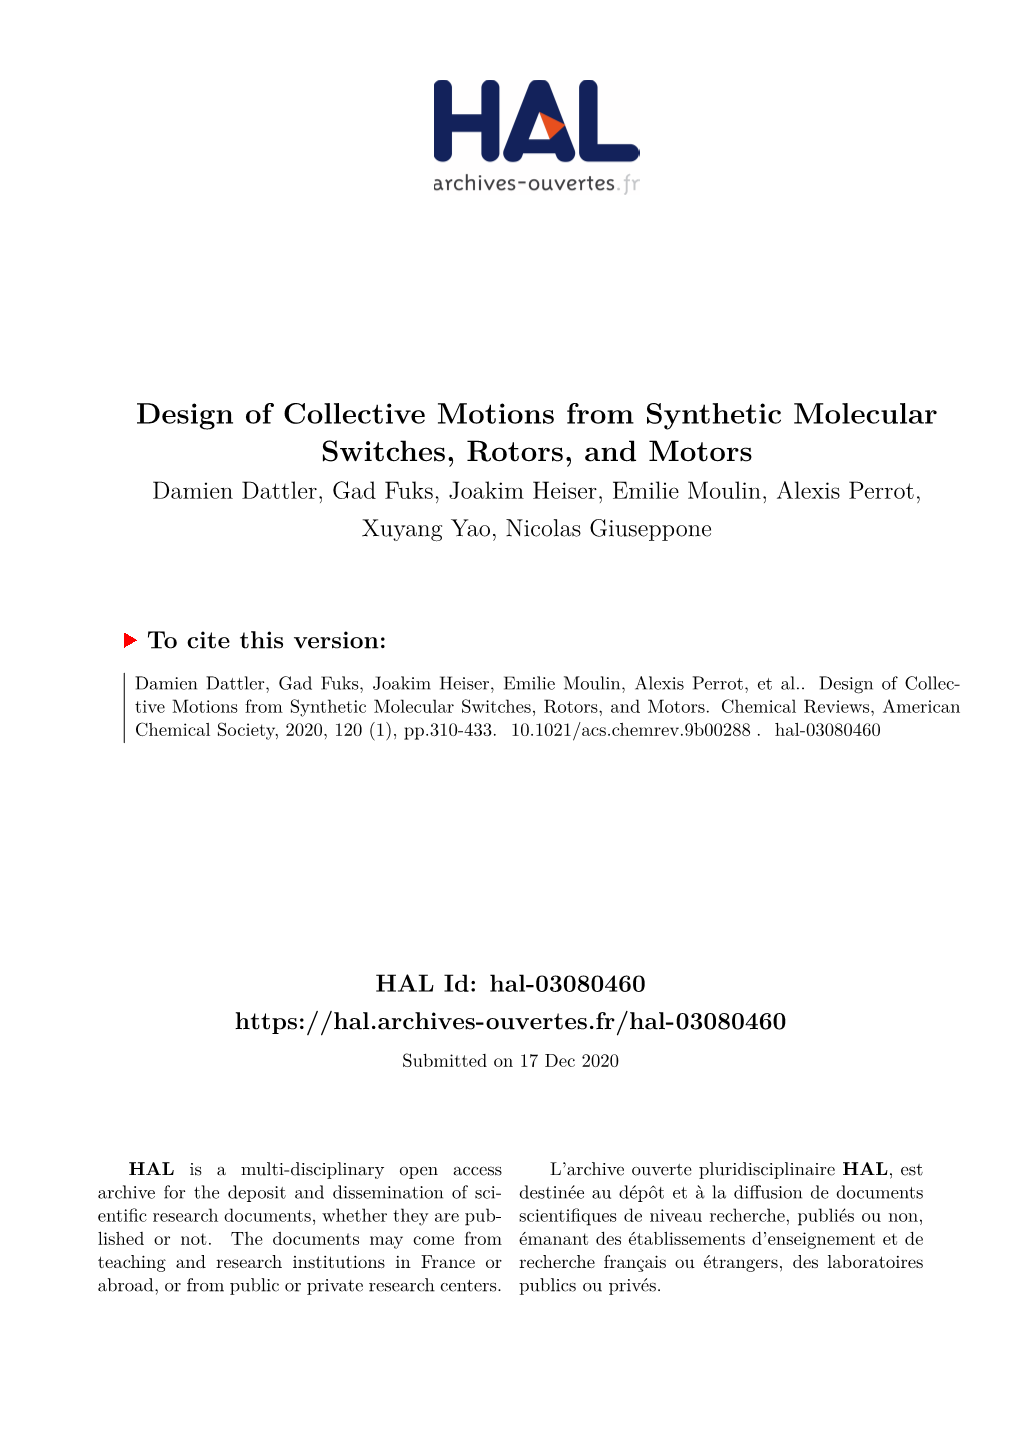 Design of Collective Motions from Synthetic Molecular Switches